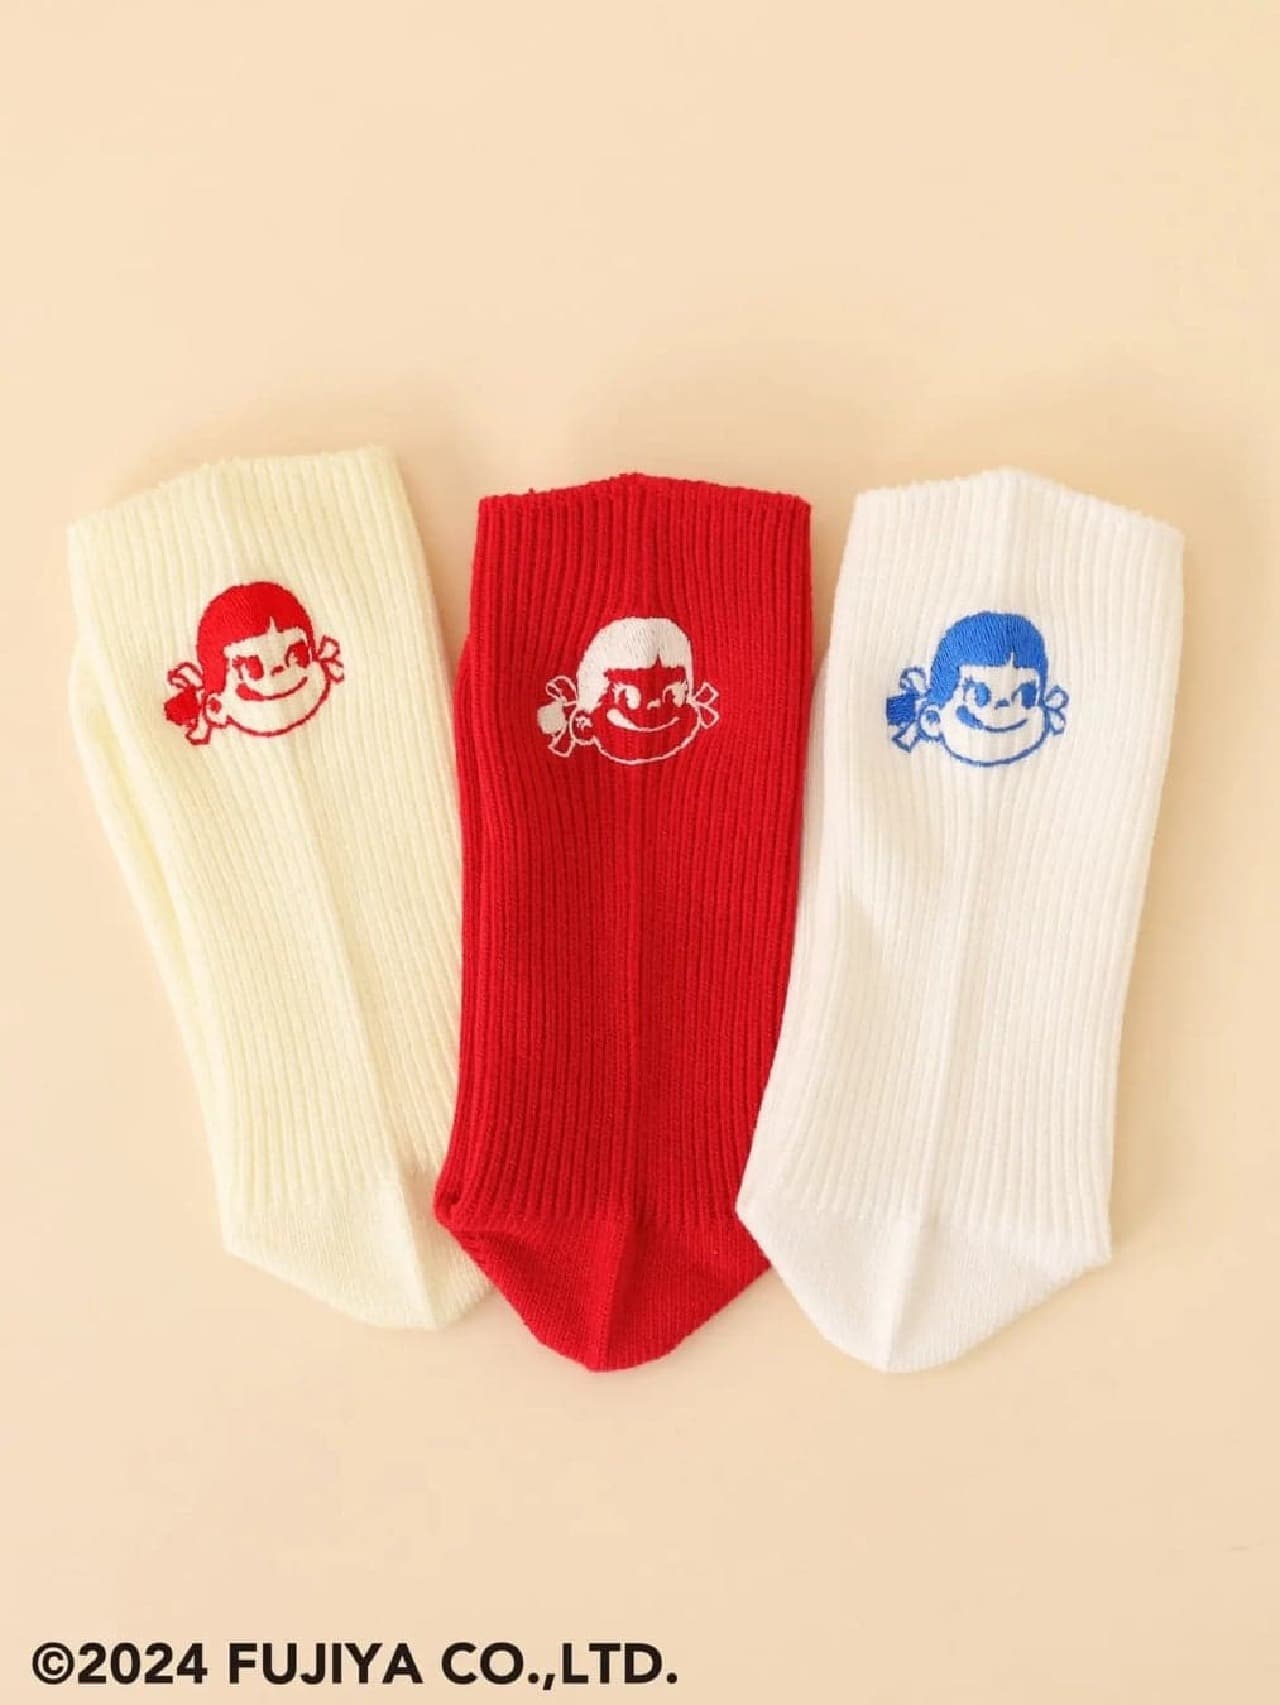 An attractive collaboration between Tabio and Peko-chan! Specially designed socks will be on sale from March 15th at participating stores and online stores nationwide Image 2